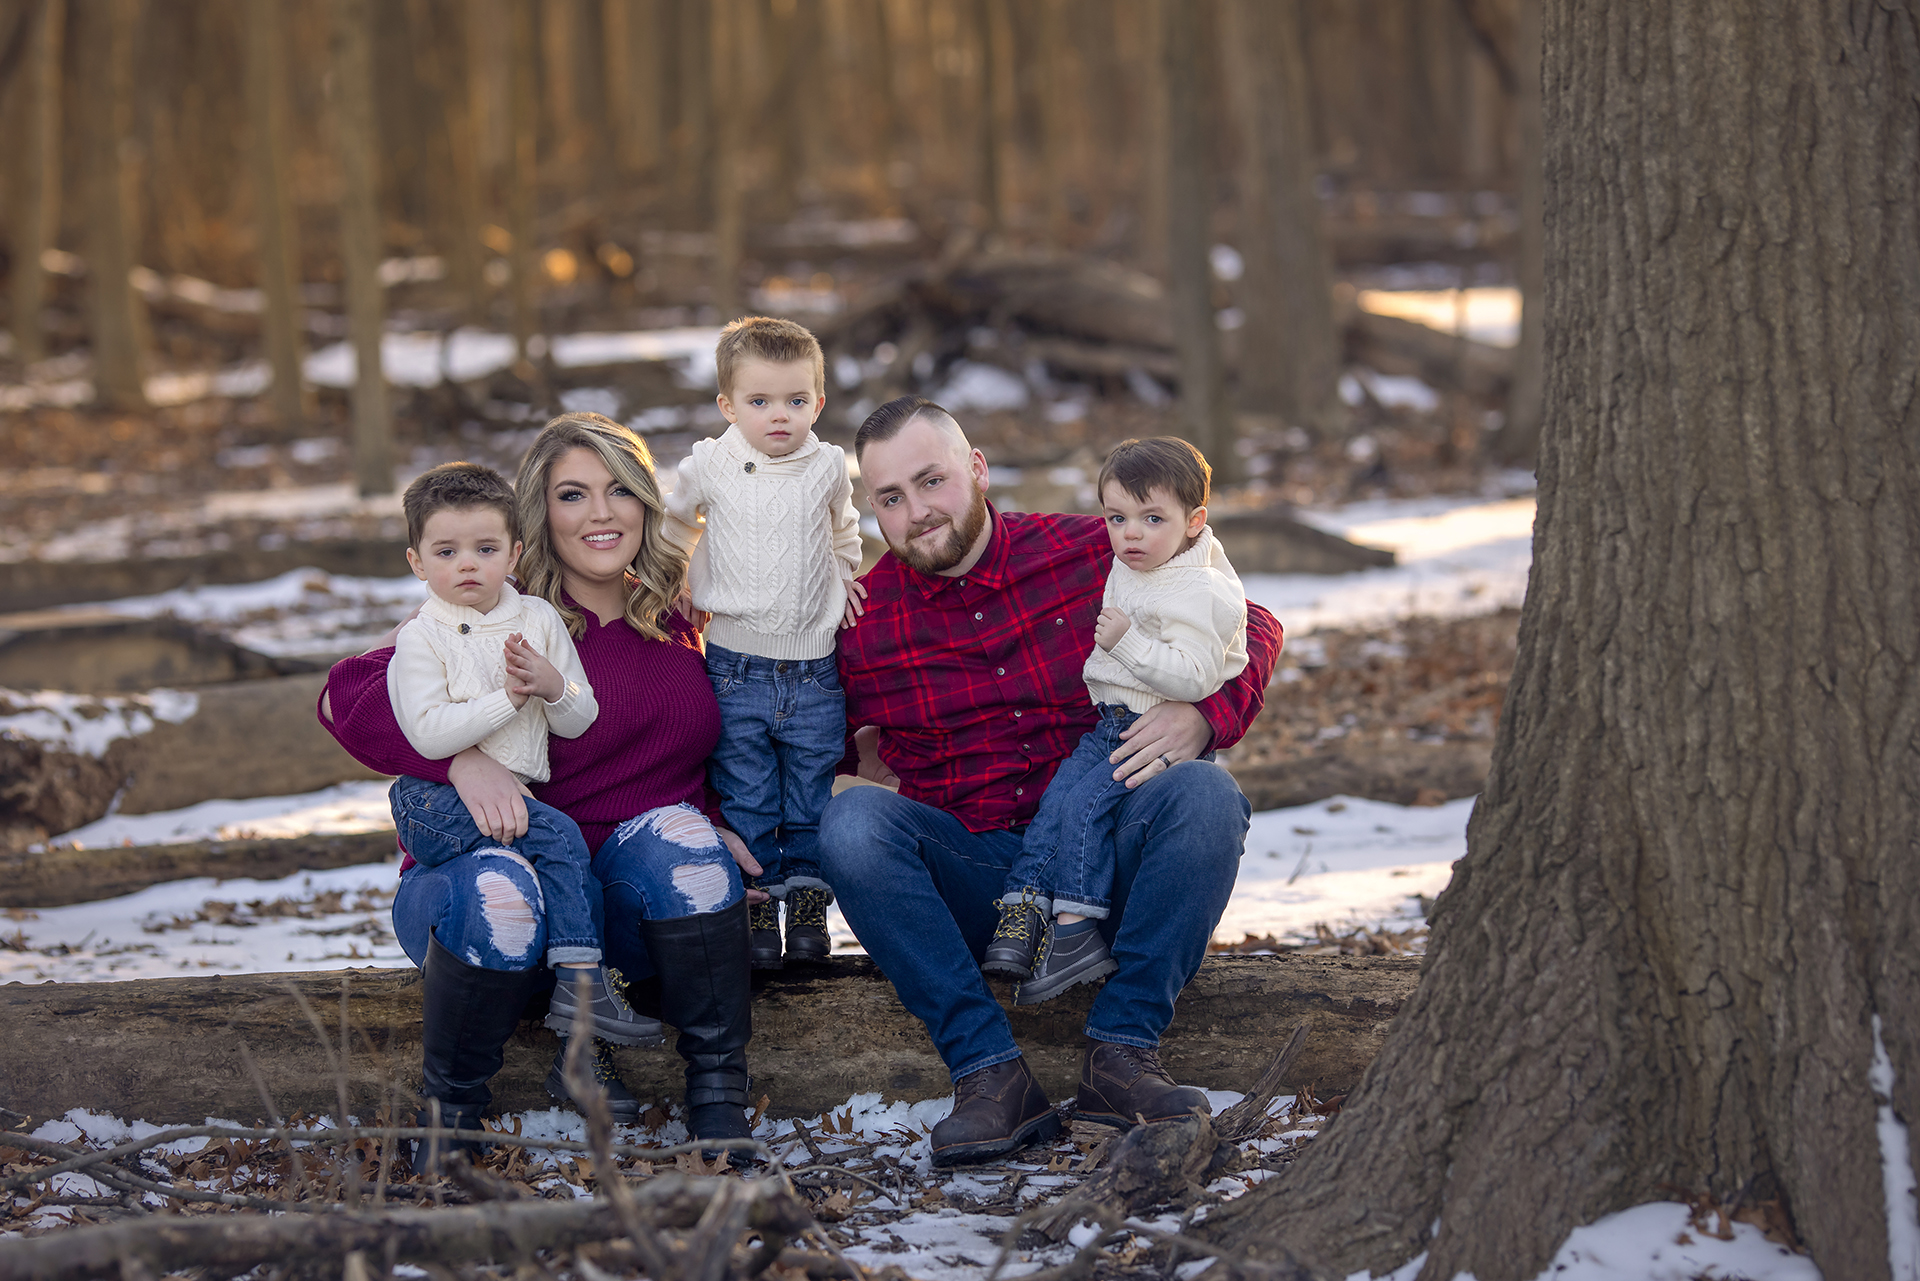 A couple and their three children pose among a snowy woodland landscape wearing coordinating red and white outfits for a family holiday photoshoot in Detroit.